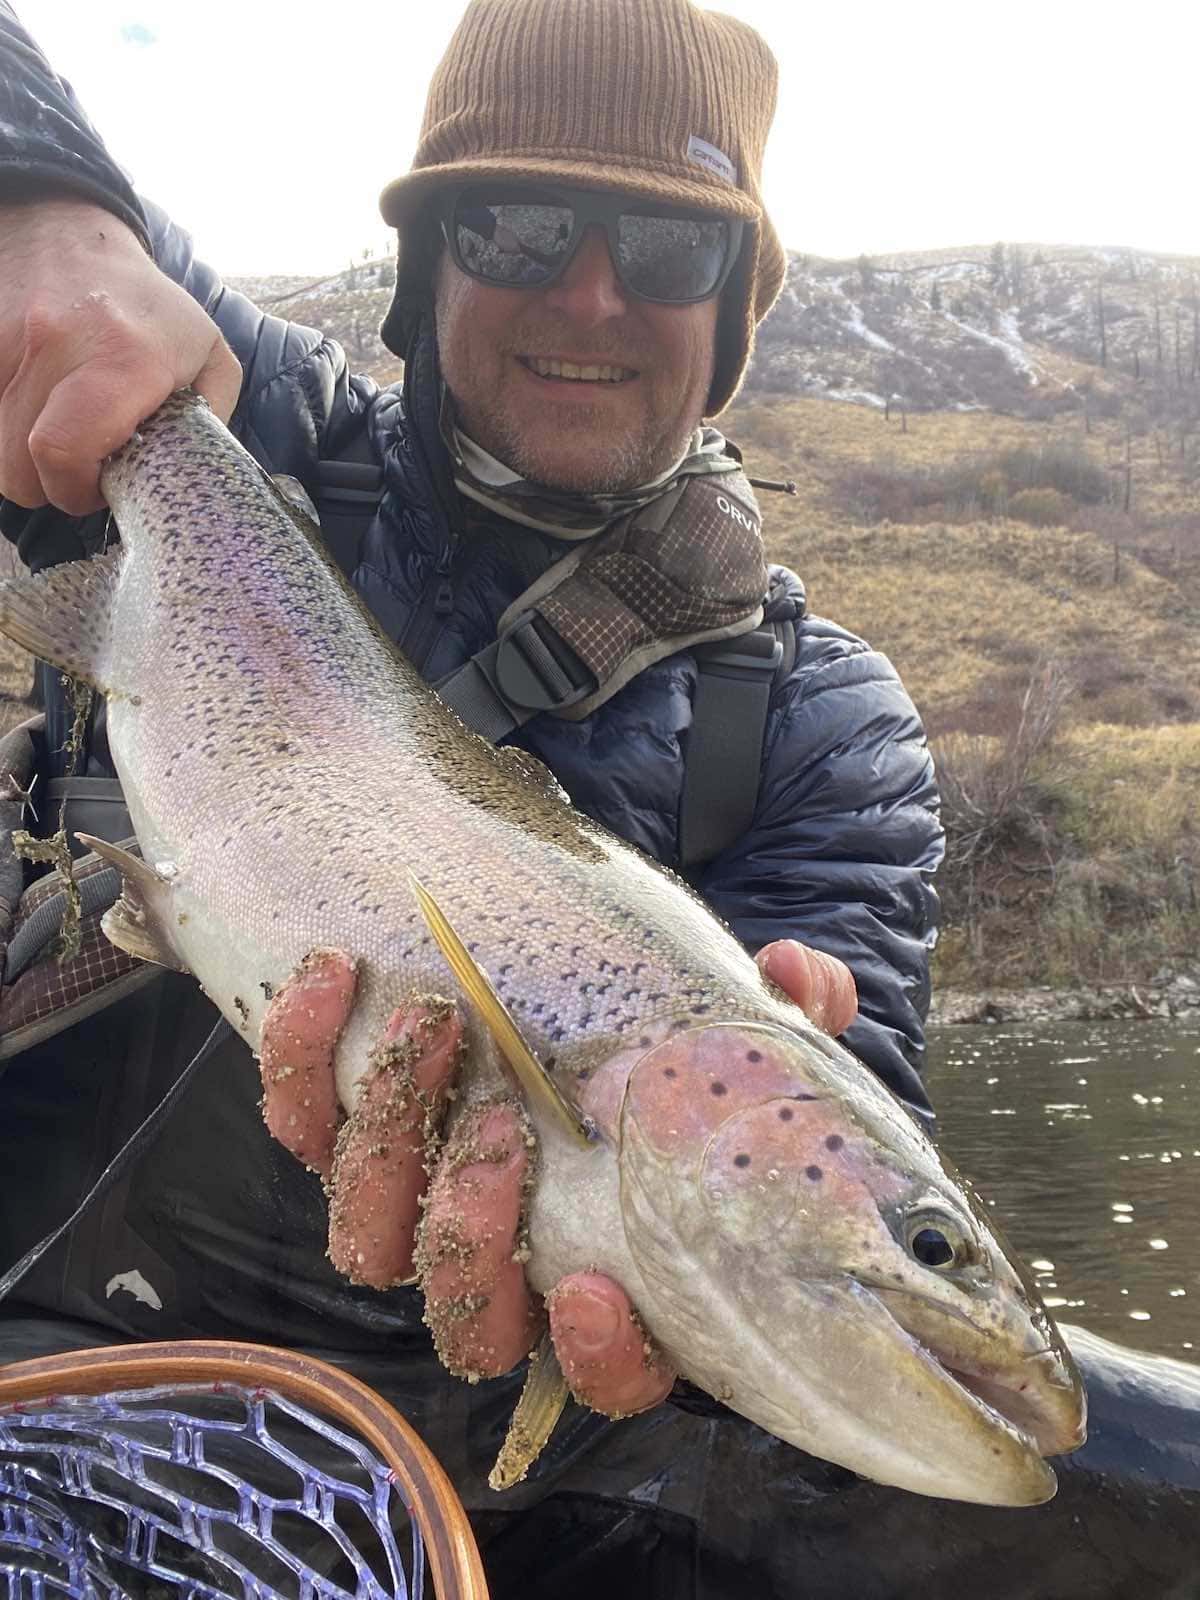 Big fish caught with net while fly fishing on river